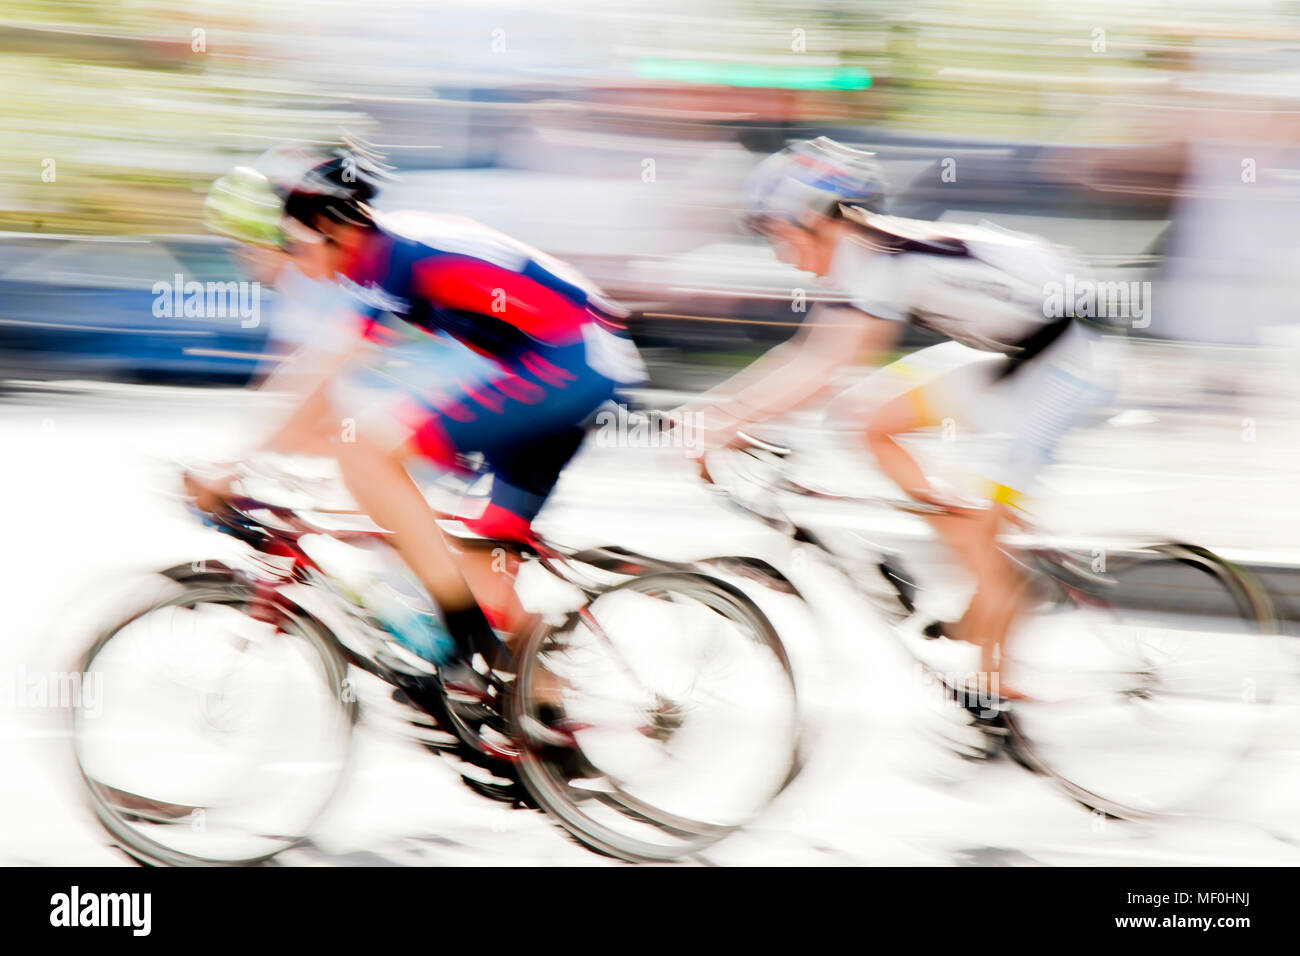 Abstract arty background : motion blur of two young bicycle racers competing on city streets Stock Photo